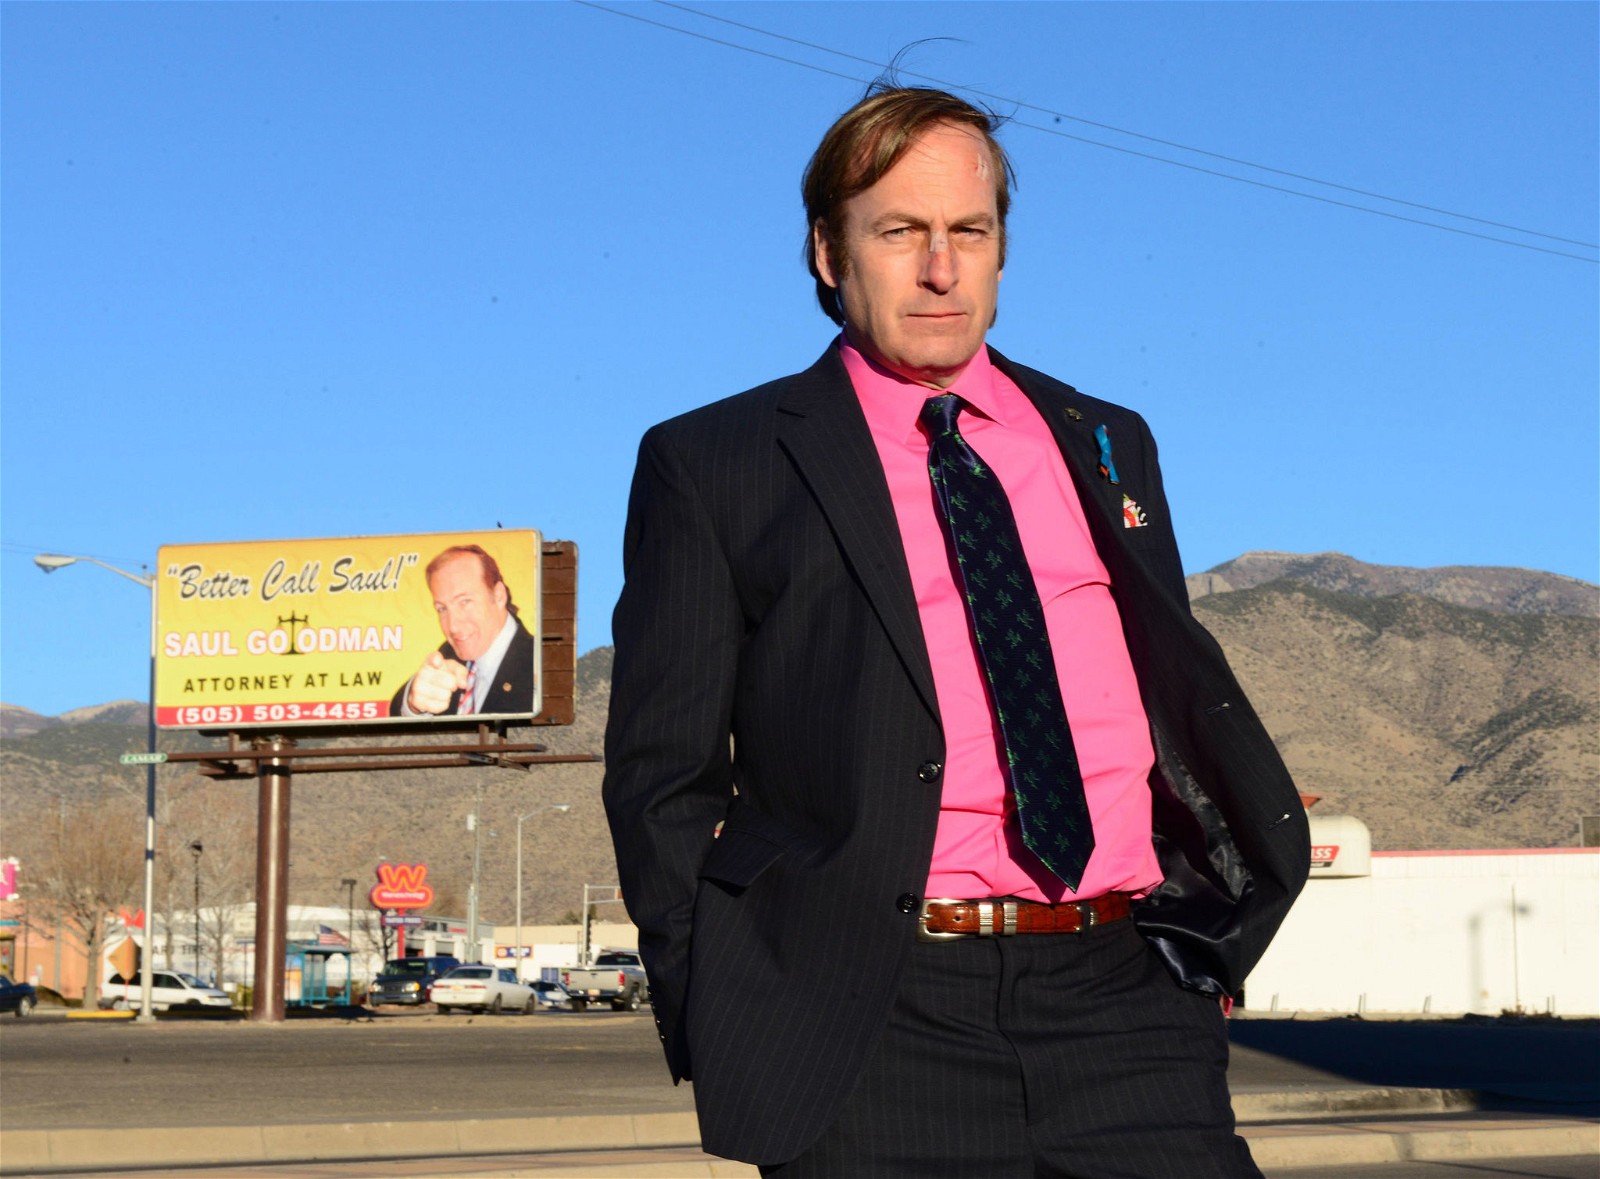 Saul Goodman while waiting outside his office in front of an advertisement sign board